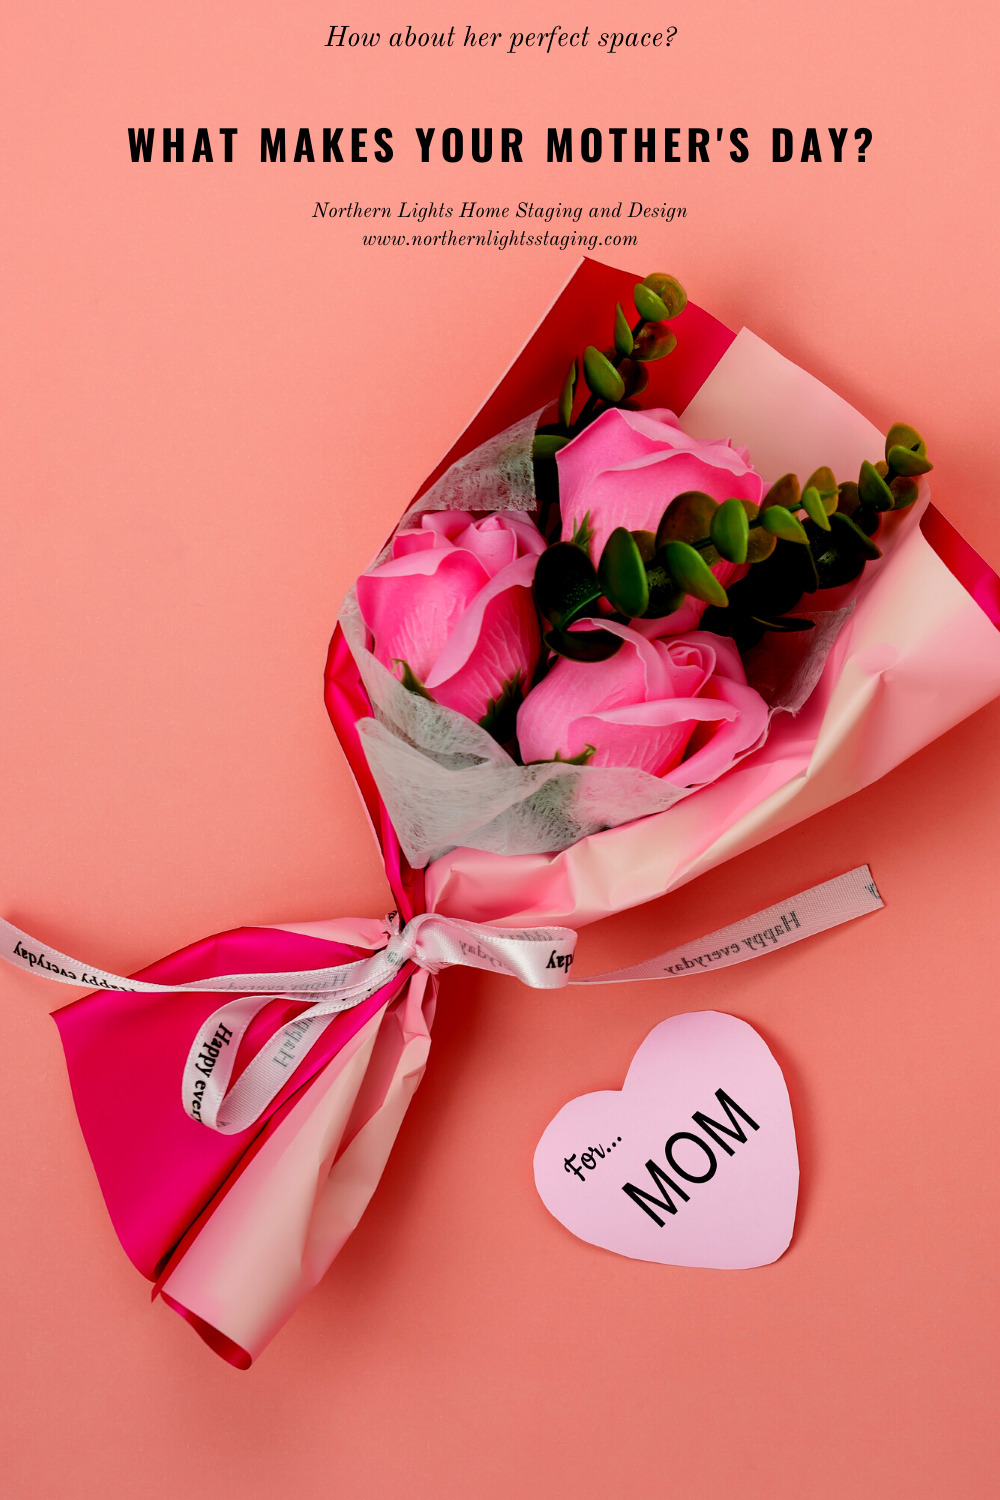 What Make’s Your Mother’s Day?